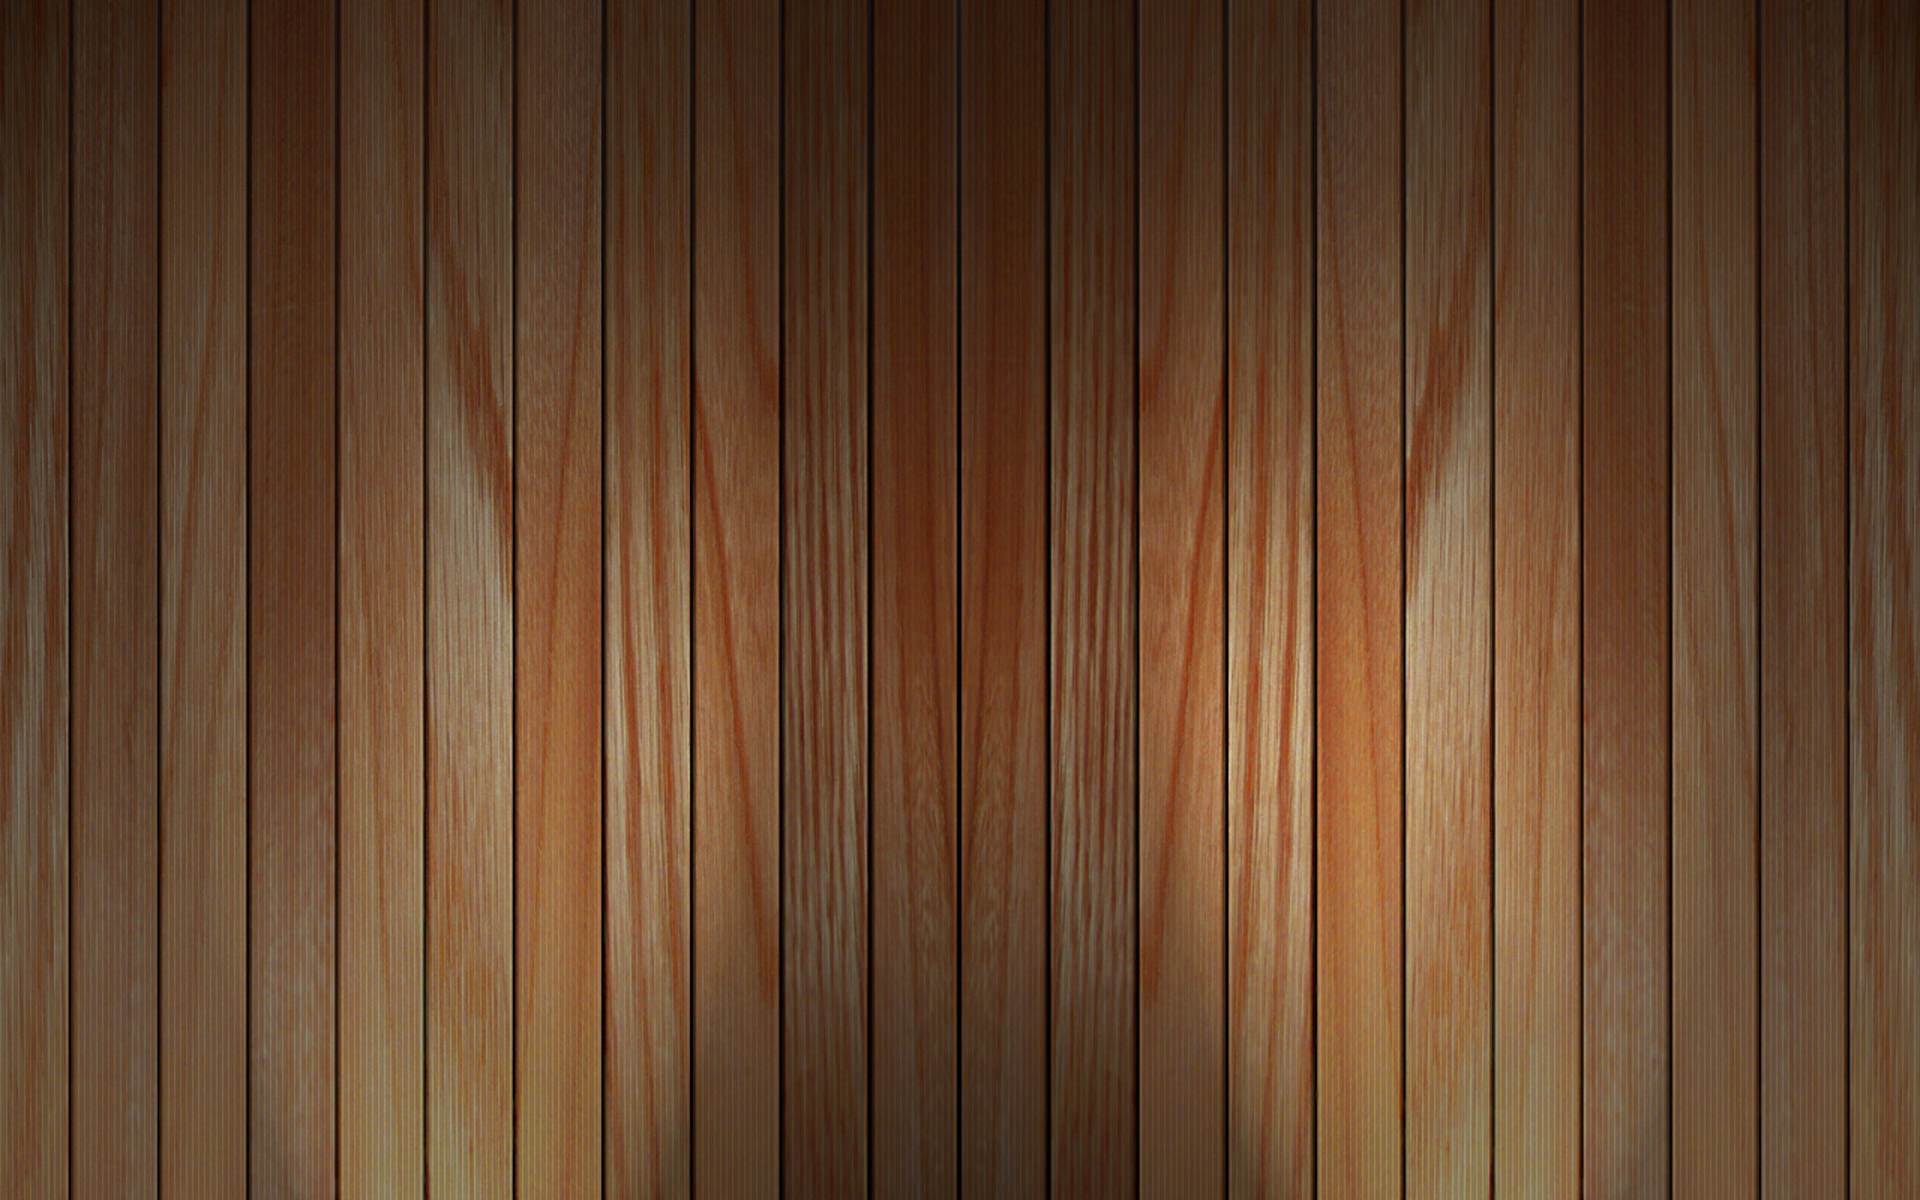 1920x1200 Wood Plank Background Texture